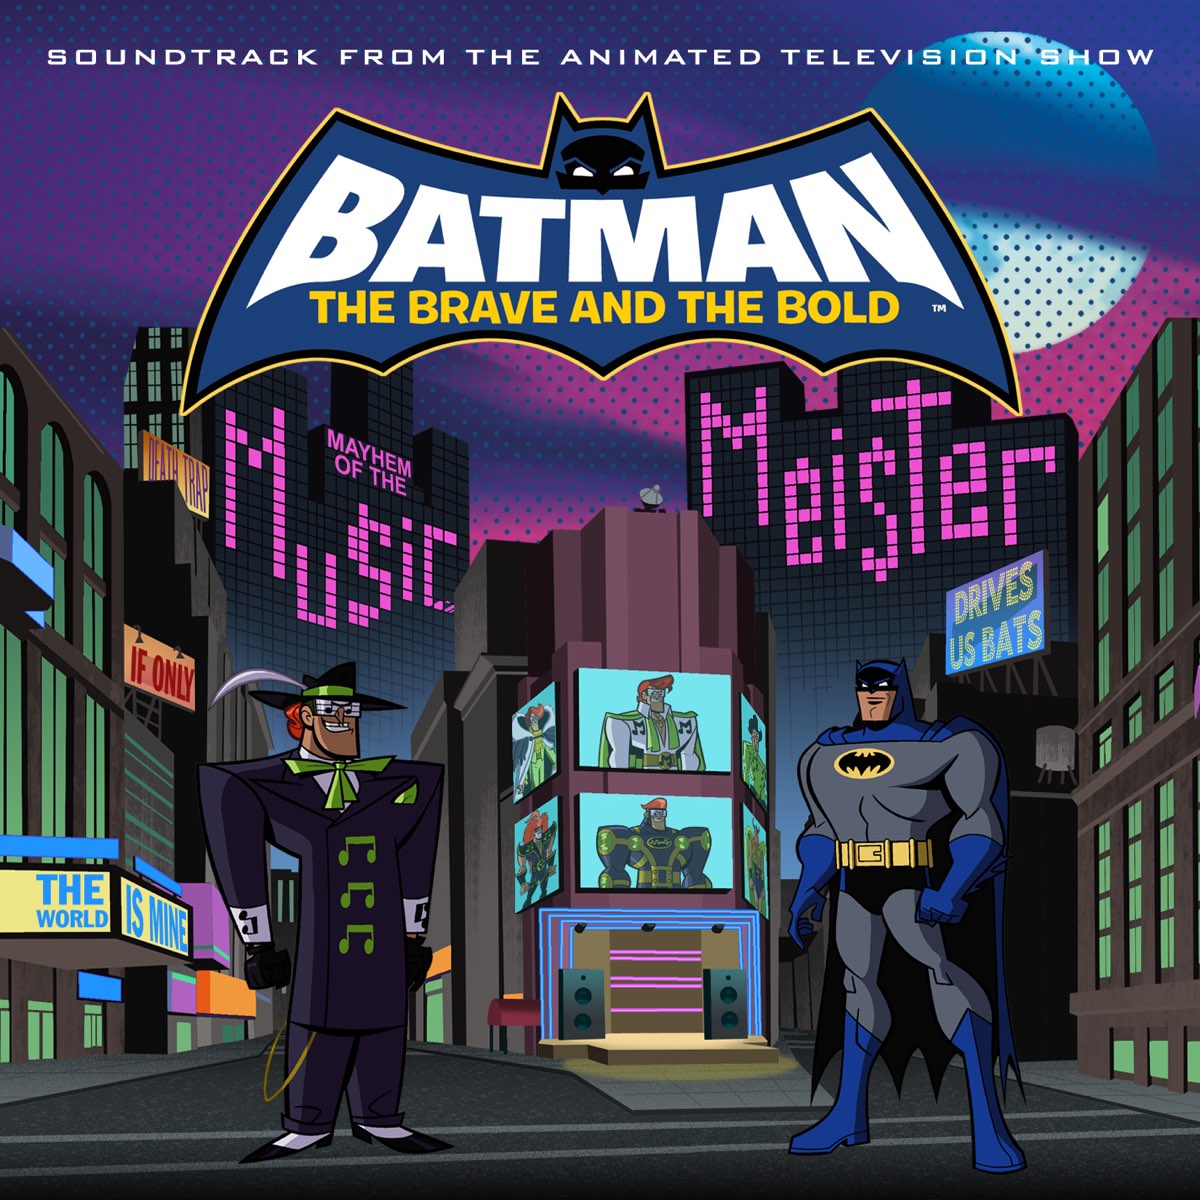 Batman: The Brave & the Bold (Mayhem of the Music Meister!) [Soundtrack  from the Animated TV Show] by Various Artists on Apple Music